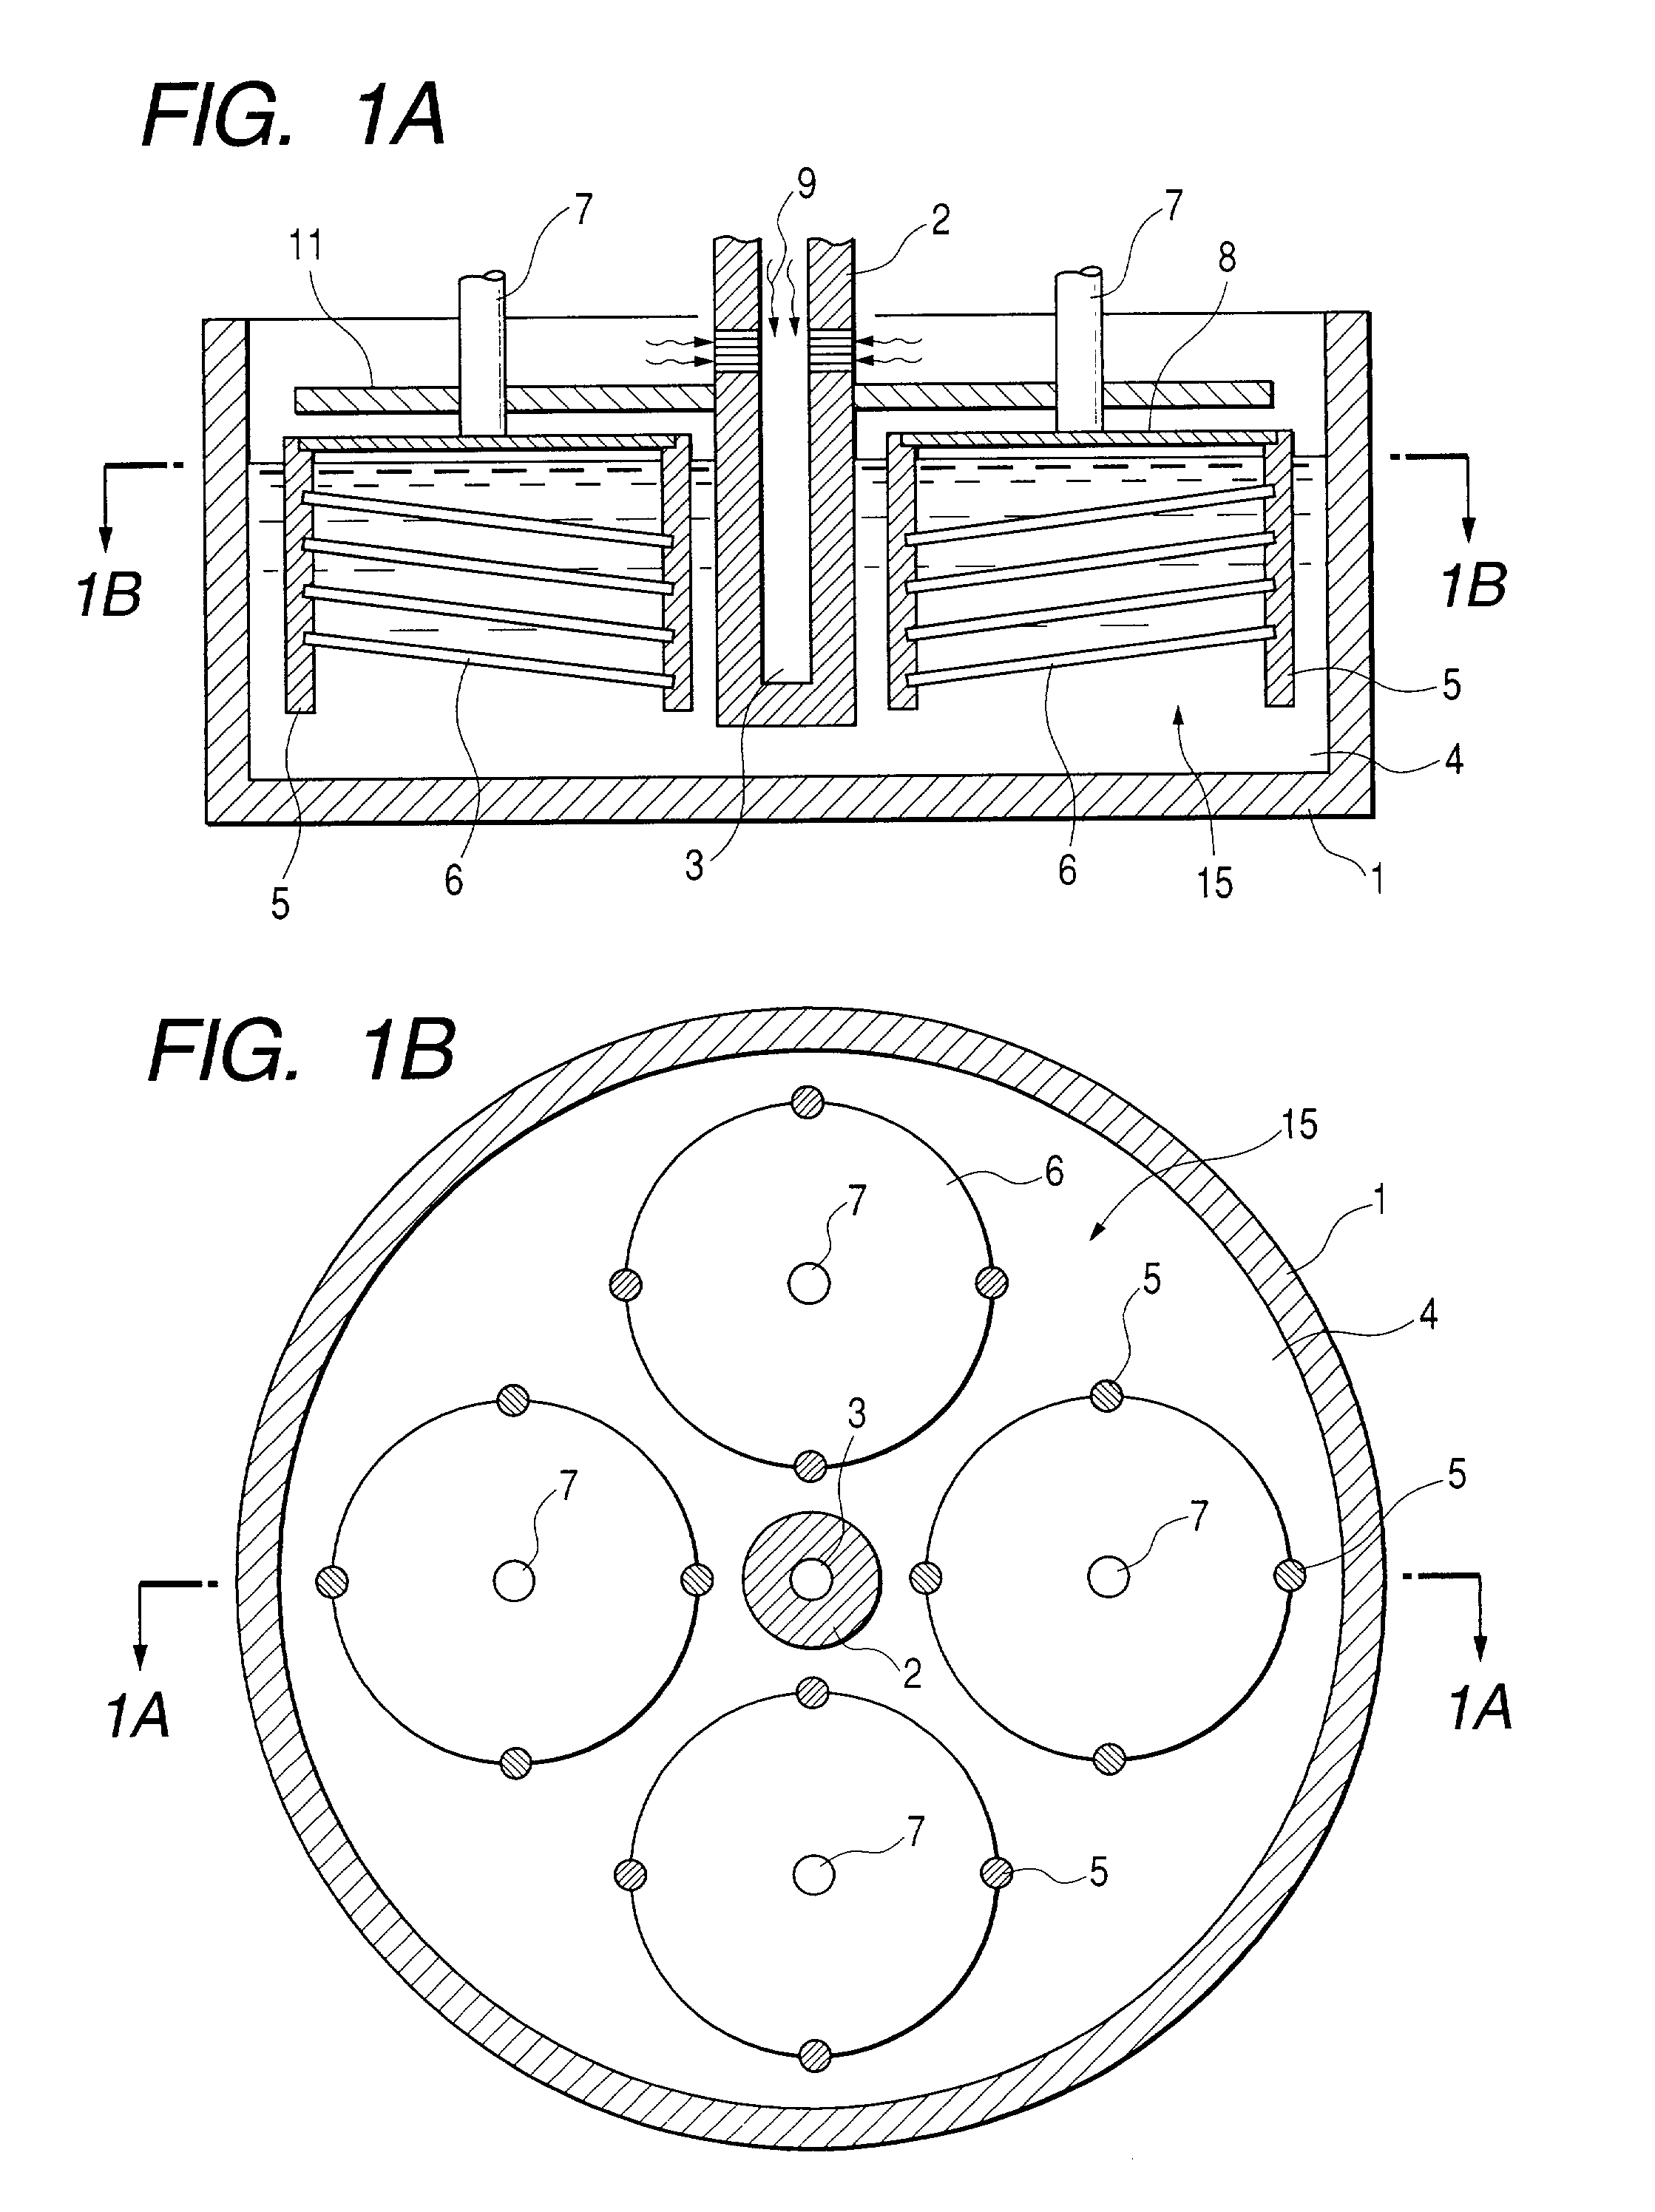 Liquid phase growth methods and liquid phase growth apparatus